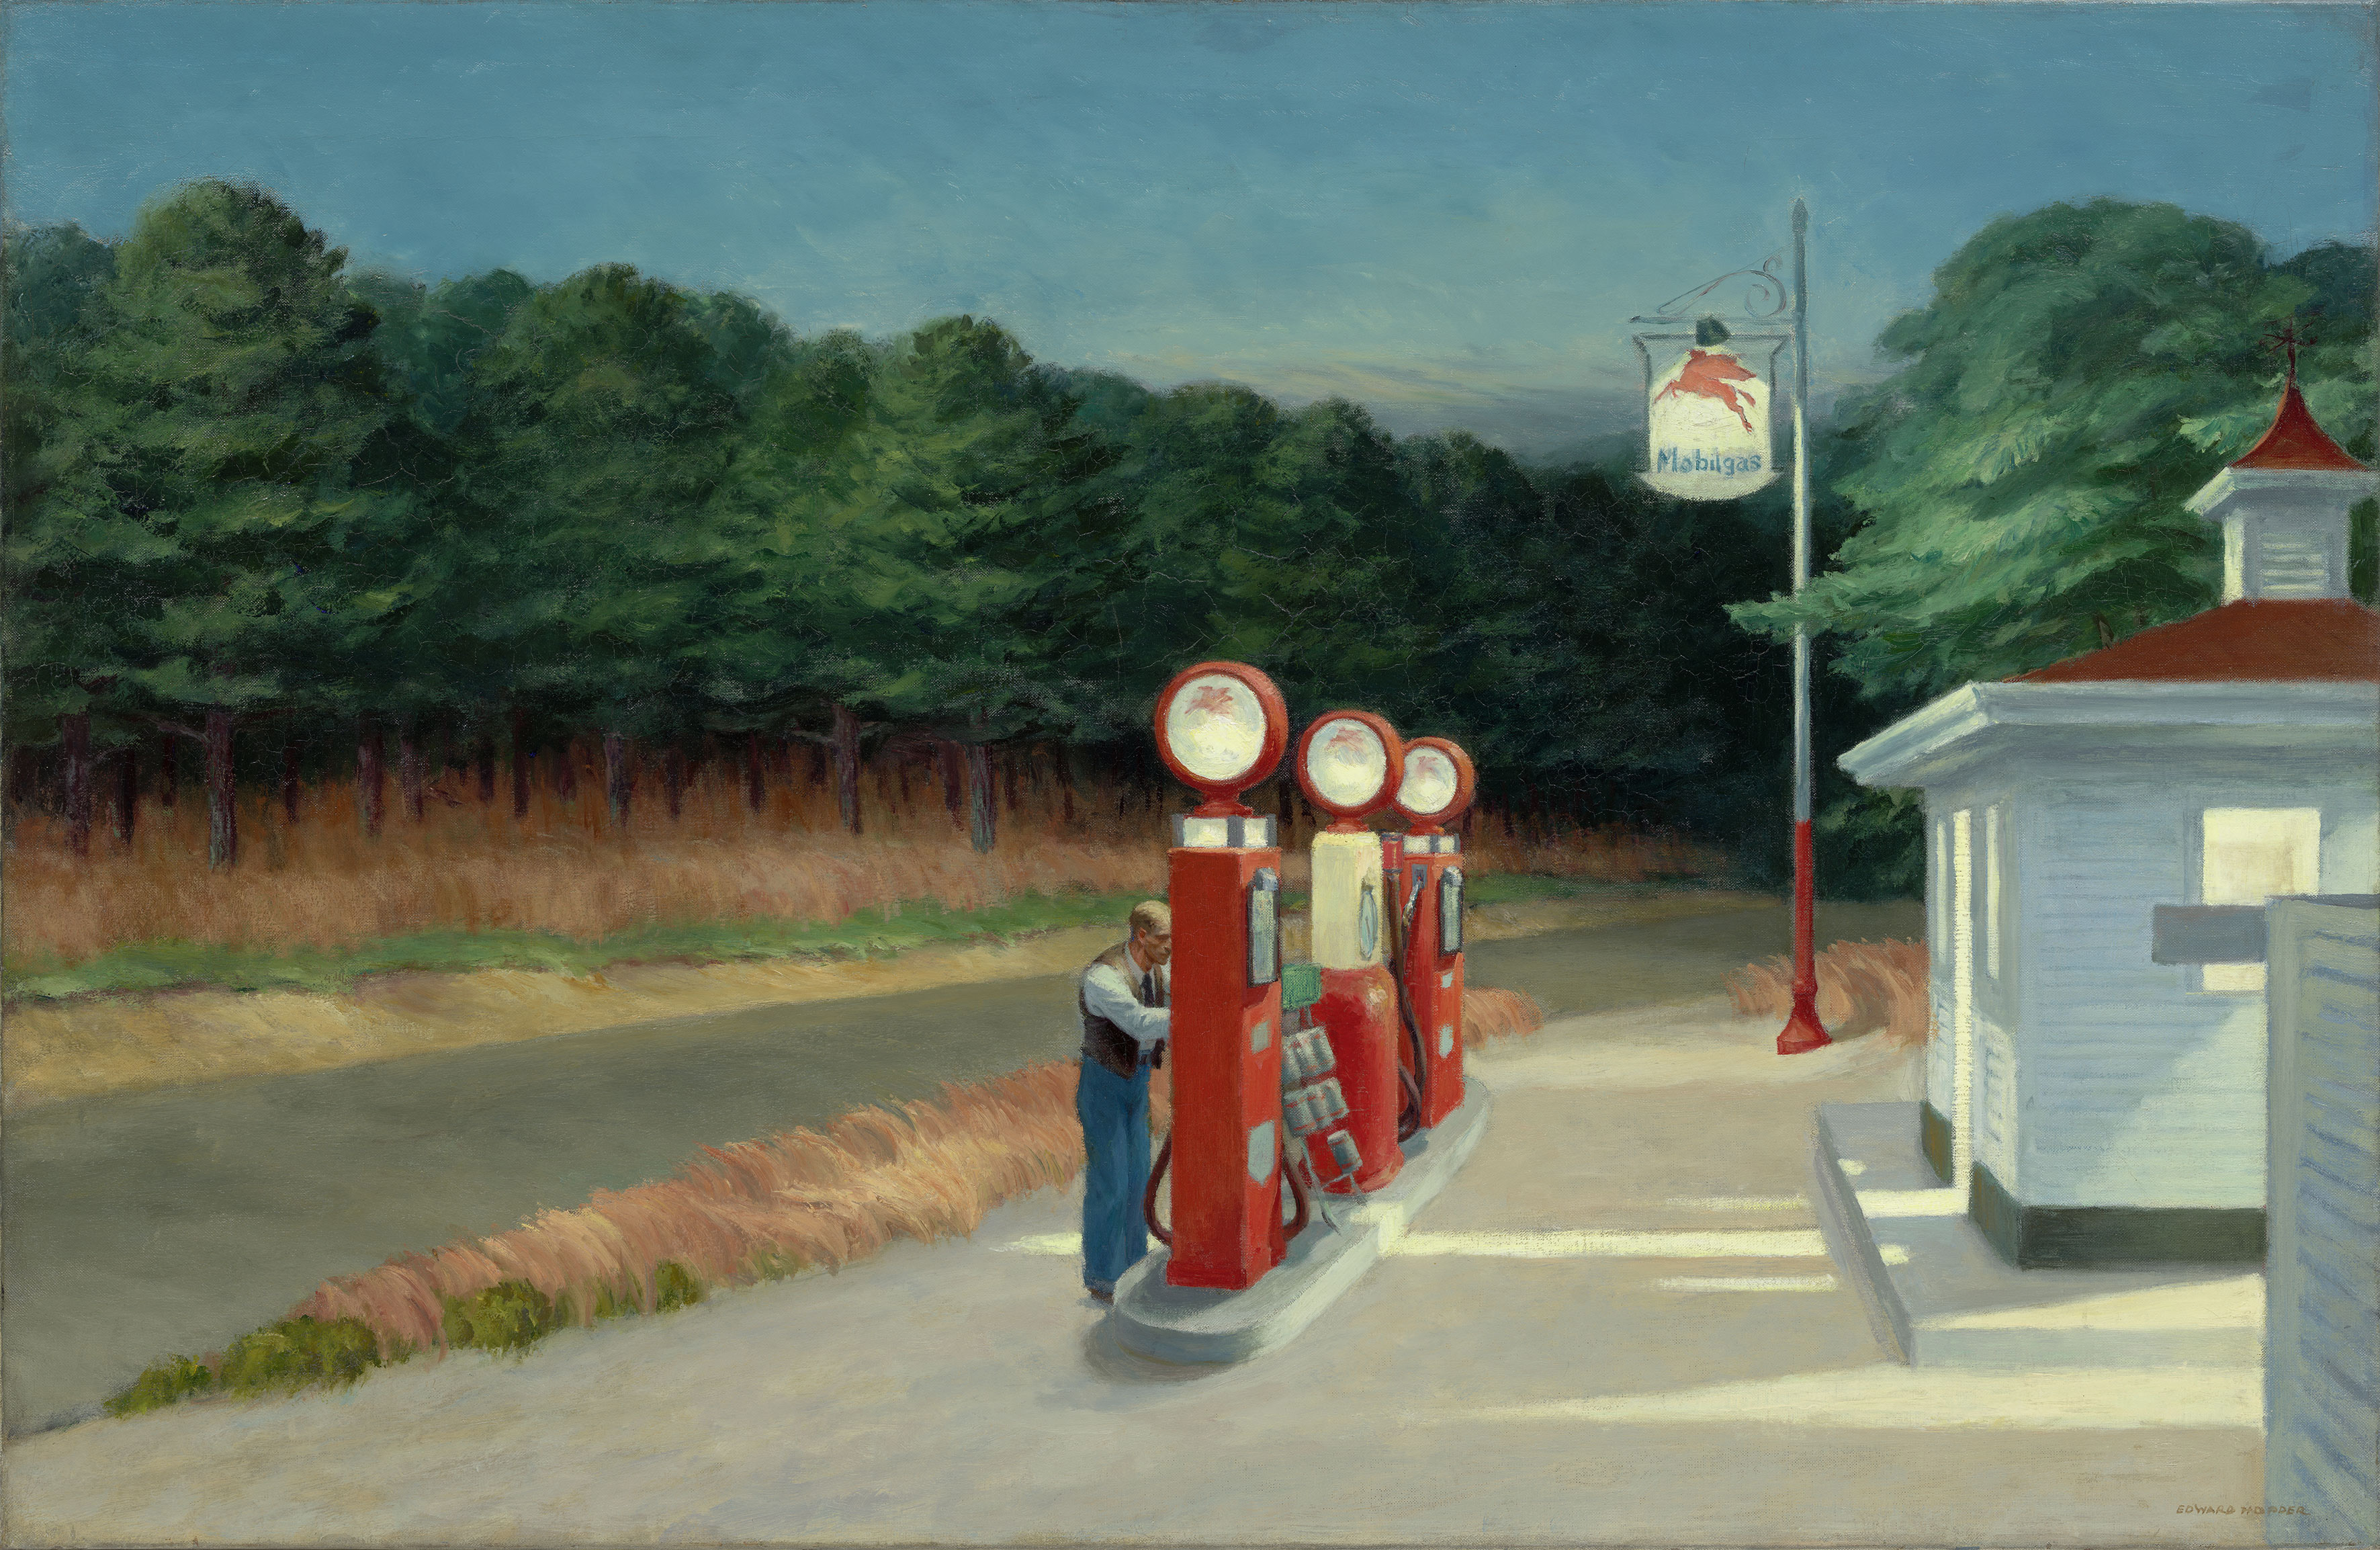 How Did Edward Hopper Manage to Turn a Plain Country Road Into a